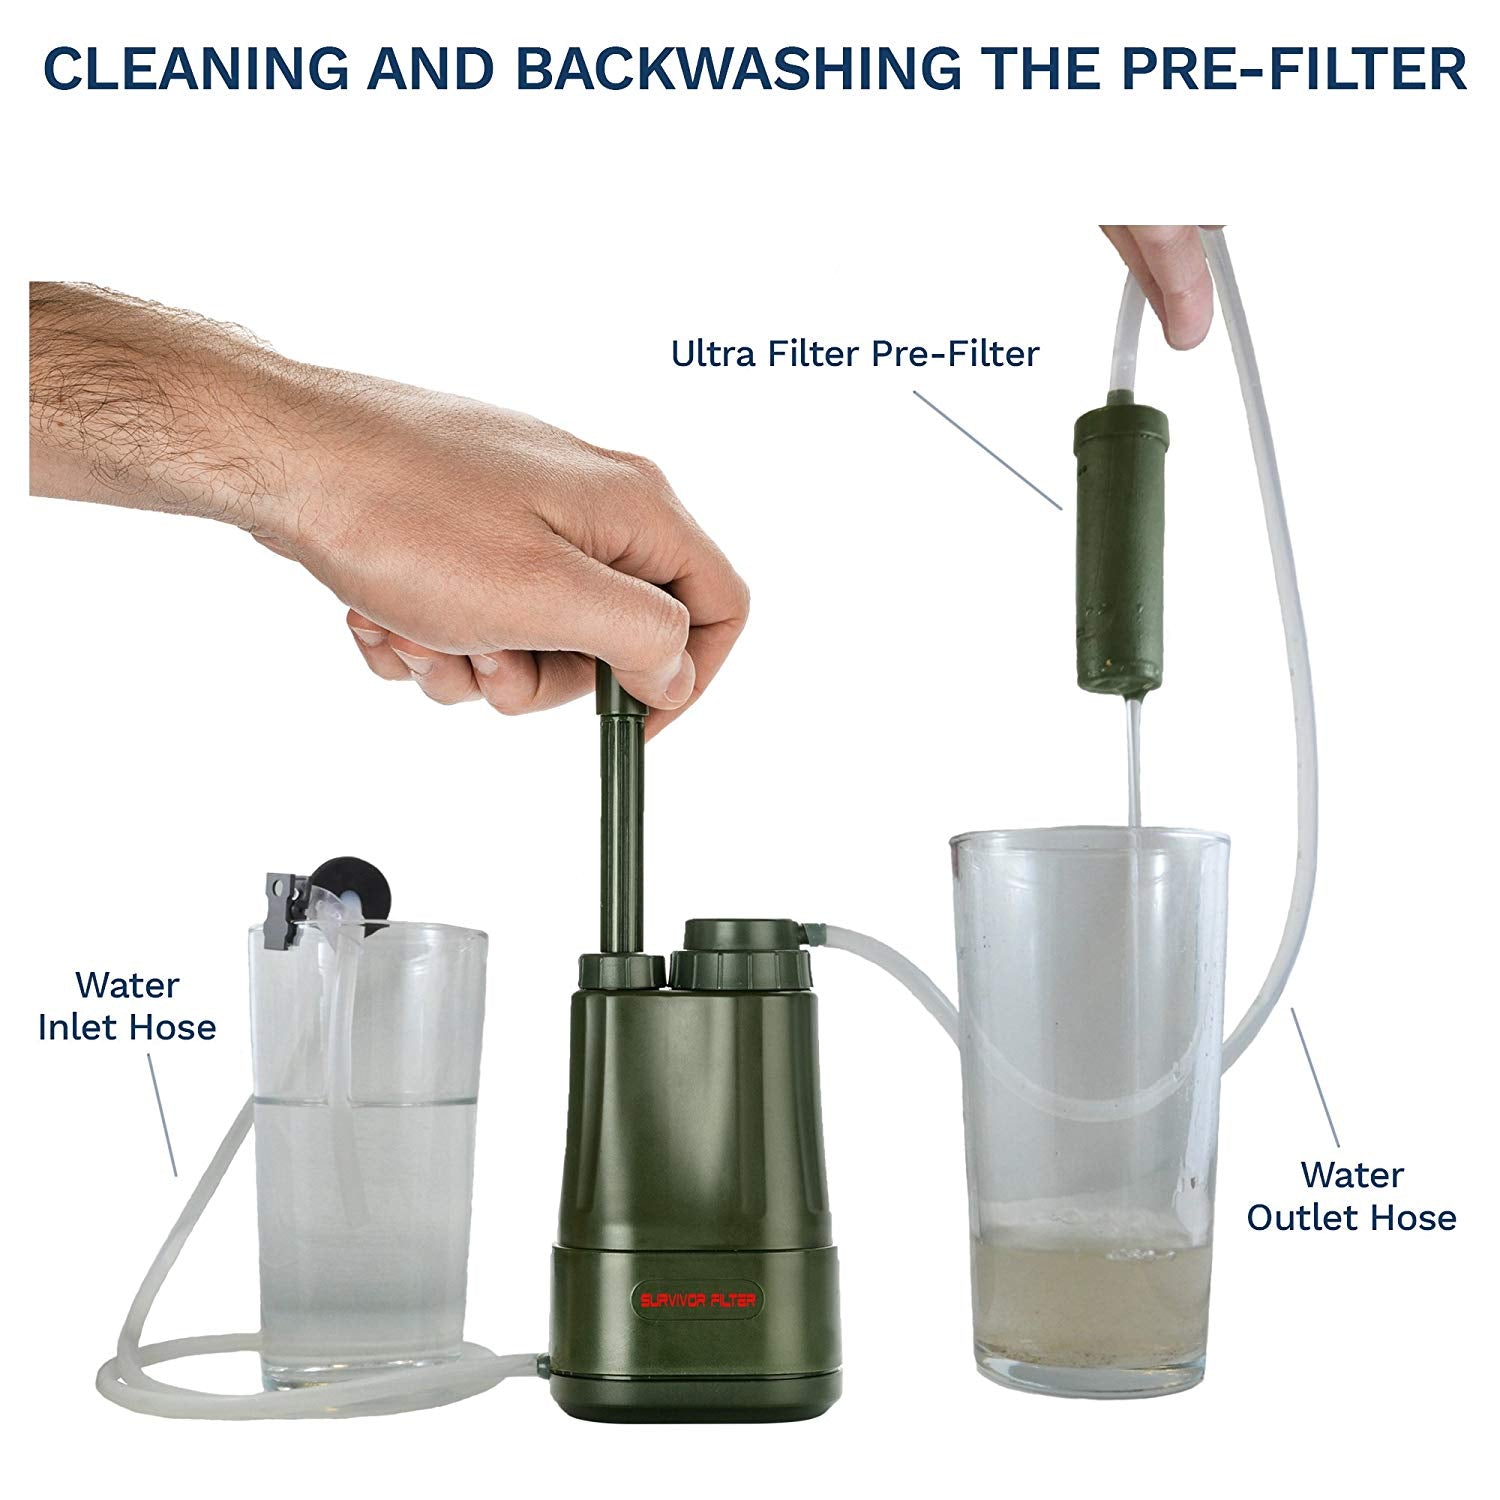 Survivor Filter PRO – Virus and Heavy Metal Tested 0.01 Micron Water Filter for Camping